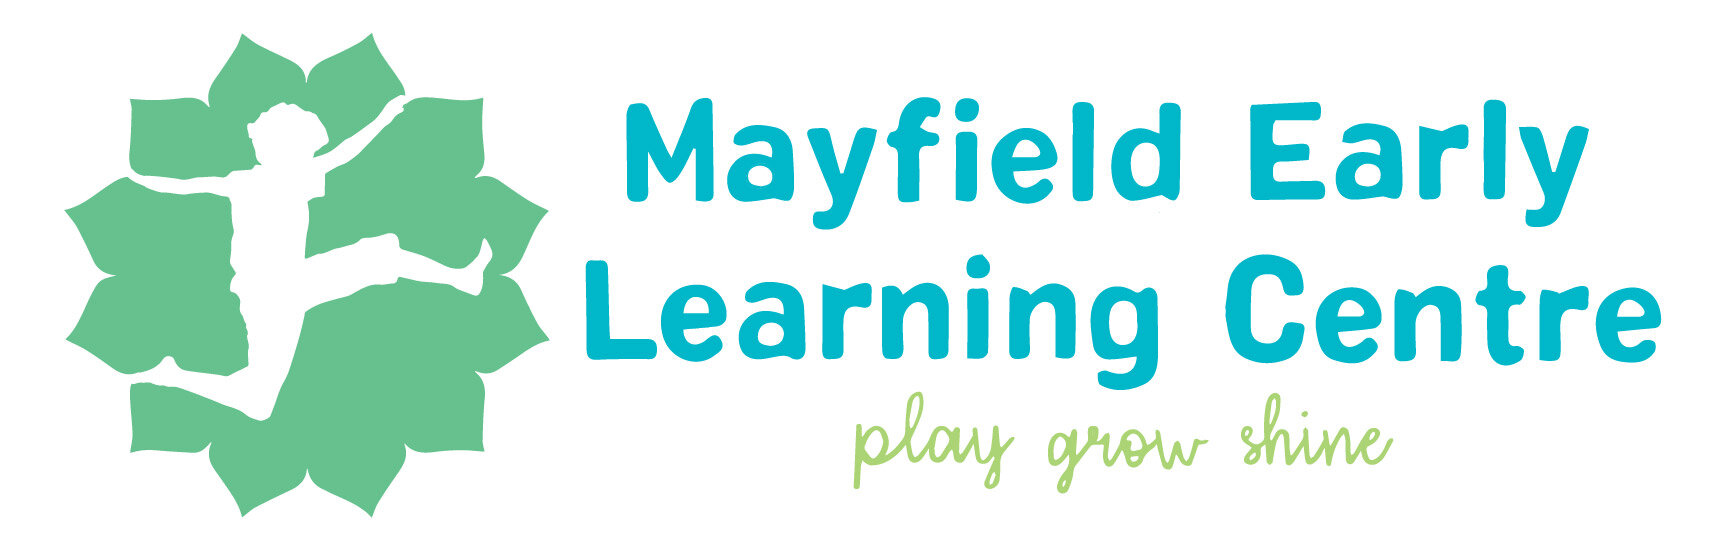 Mayfield Early Learning Centre